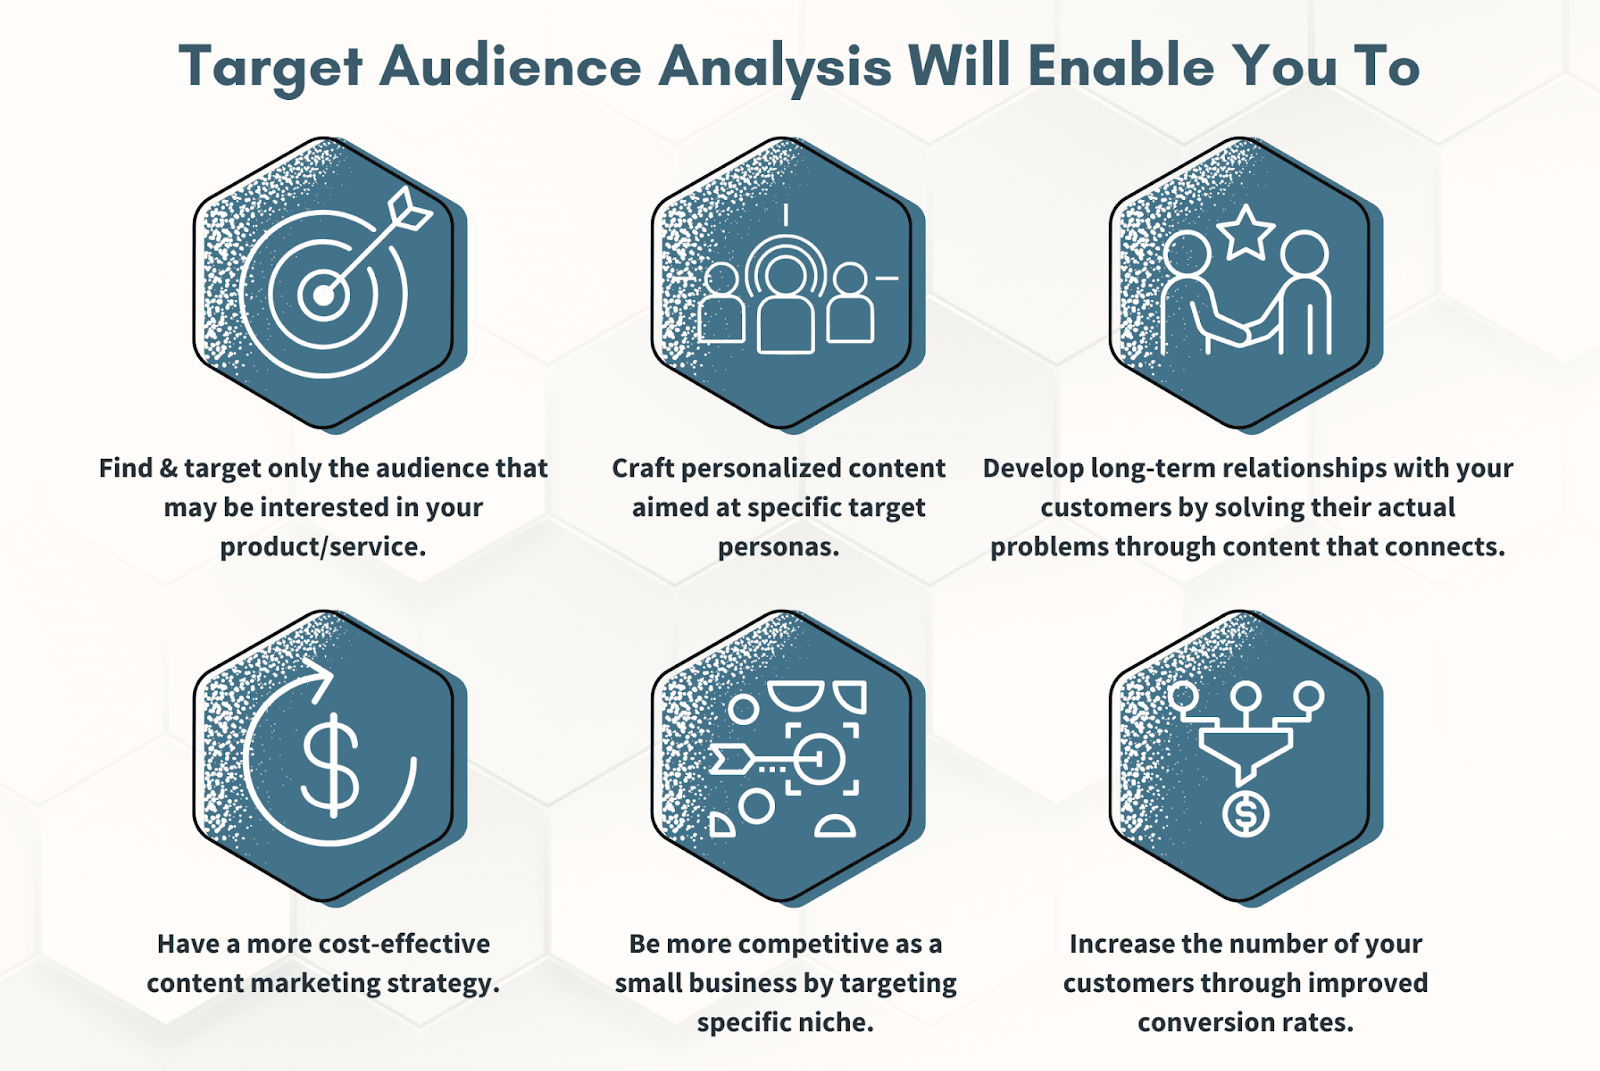 Target Audience Analysis Will Enable You To blog consistently